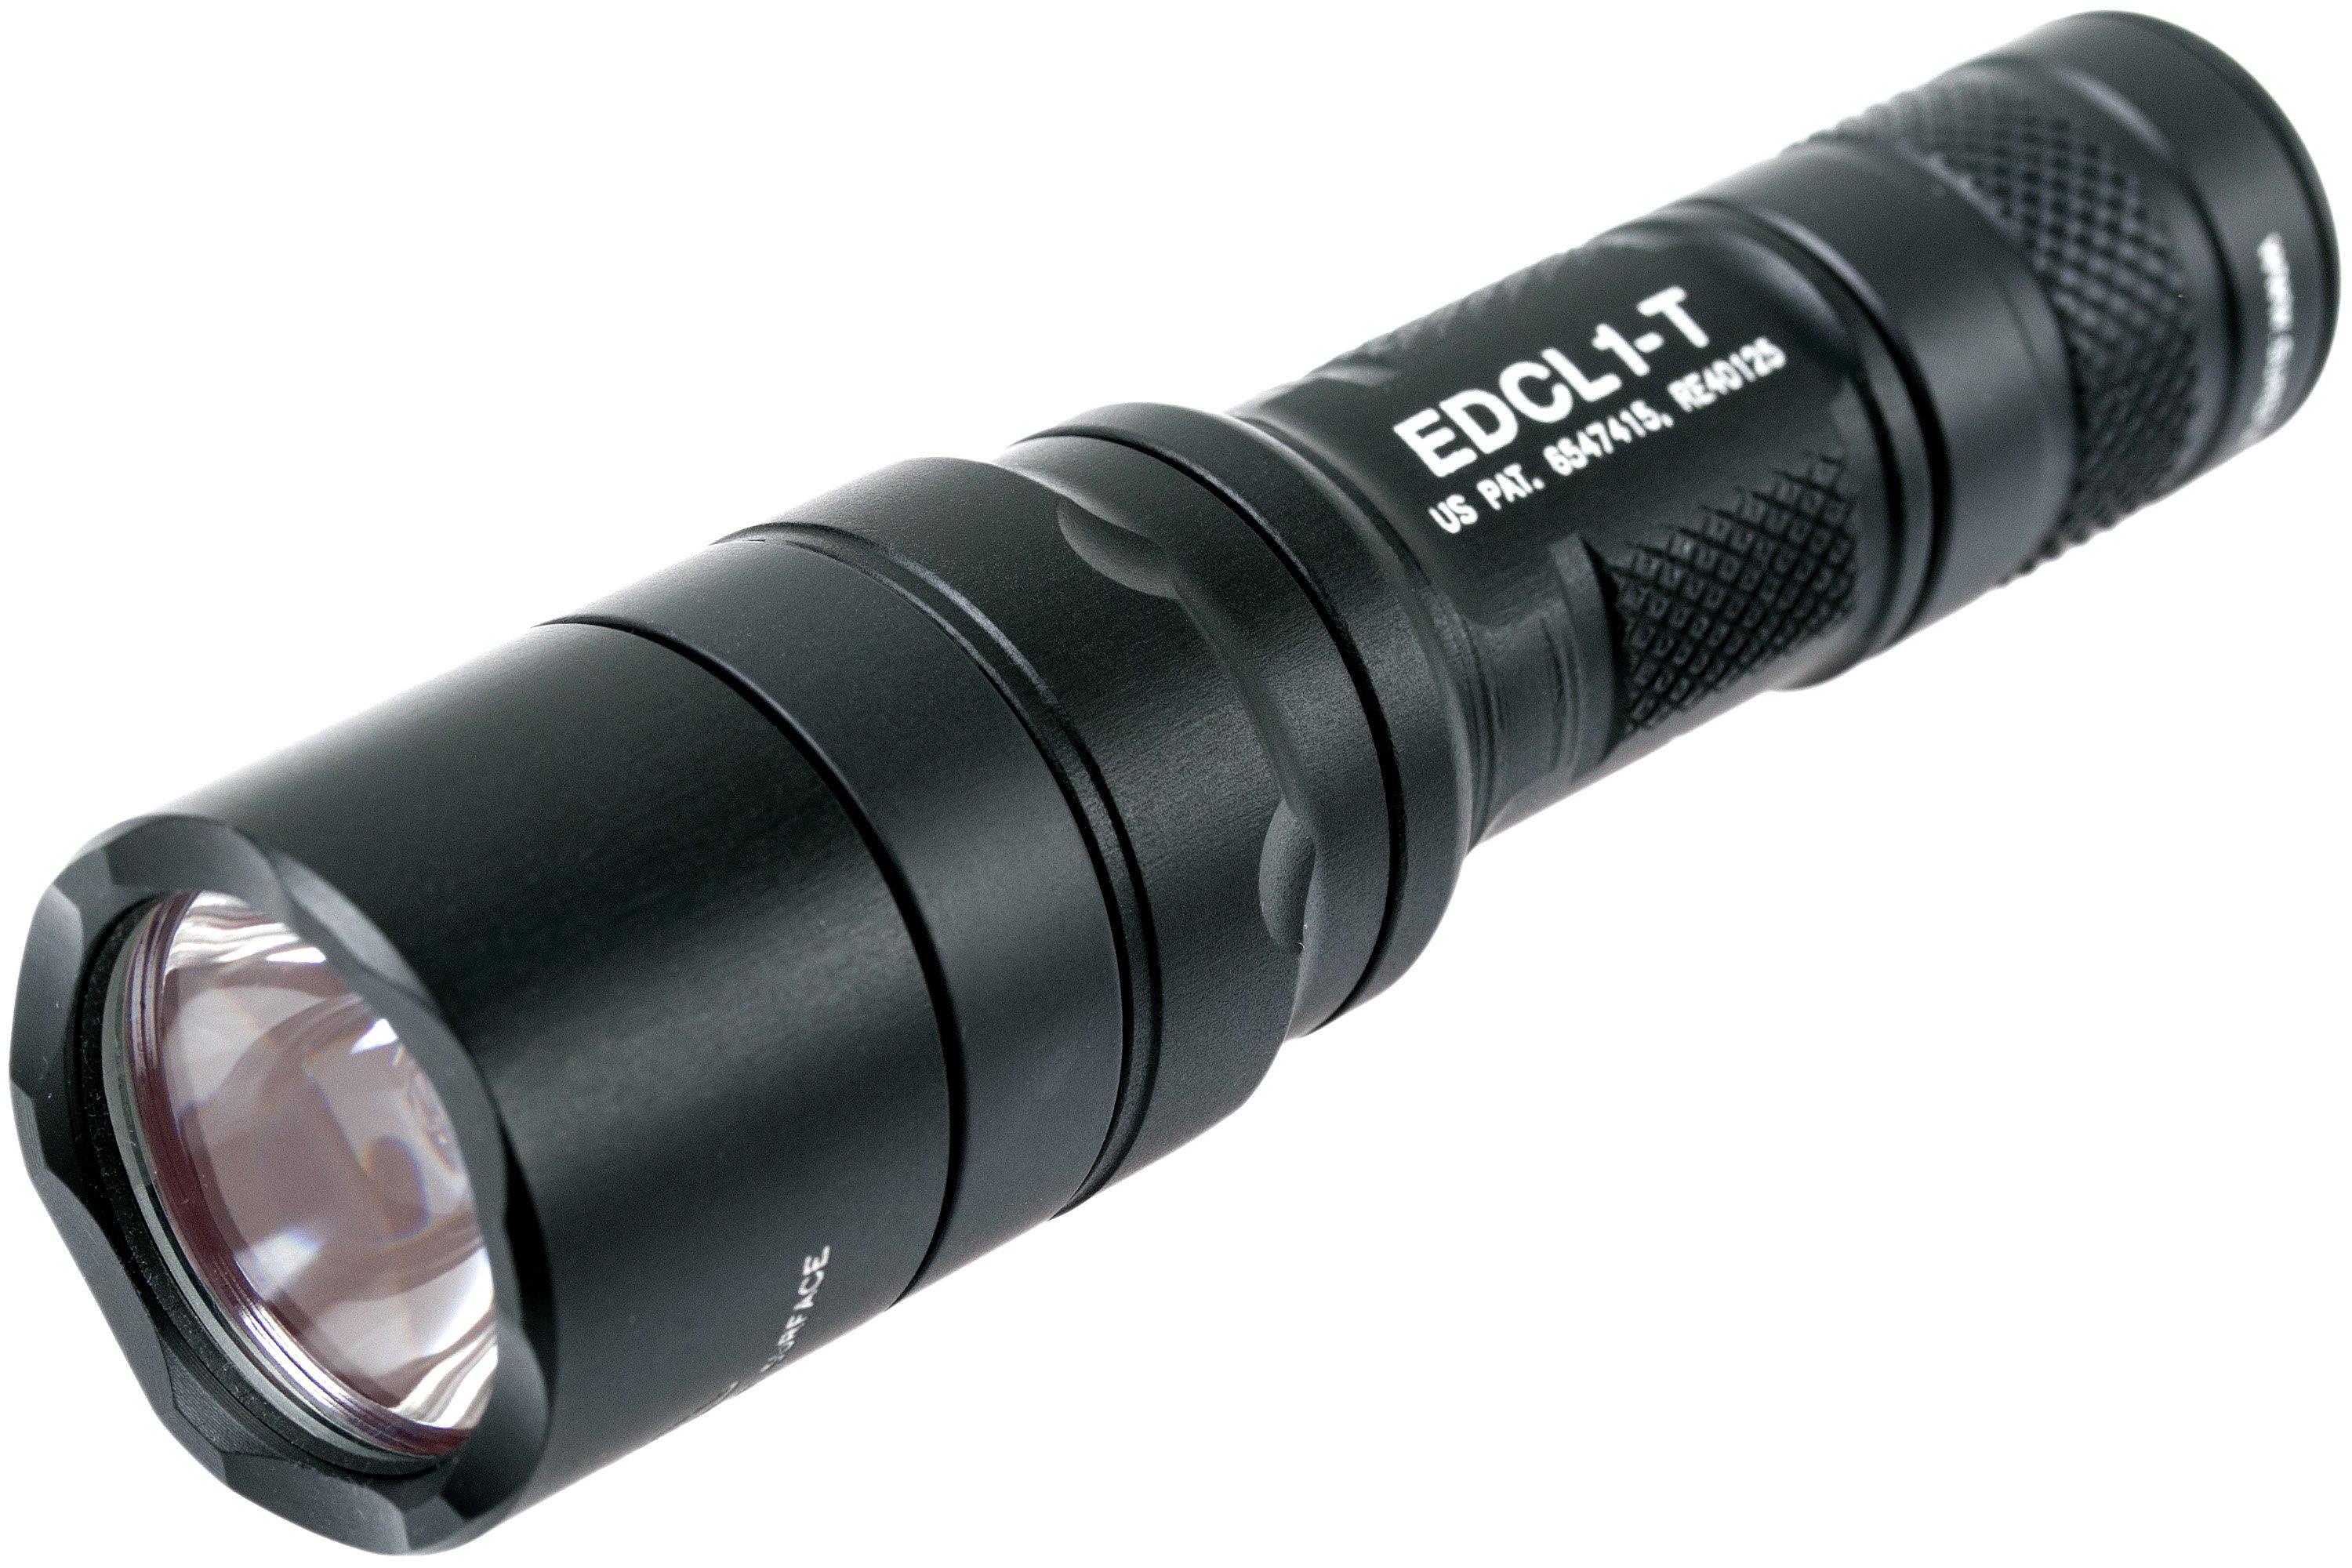 SUREFIRE(シュアファイア) EDCL1-T Dual-Output Everyday Carry LED フラッシュ - 3